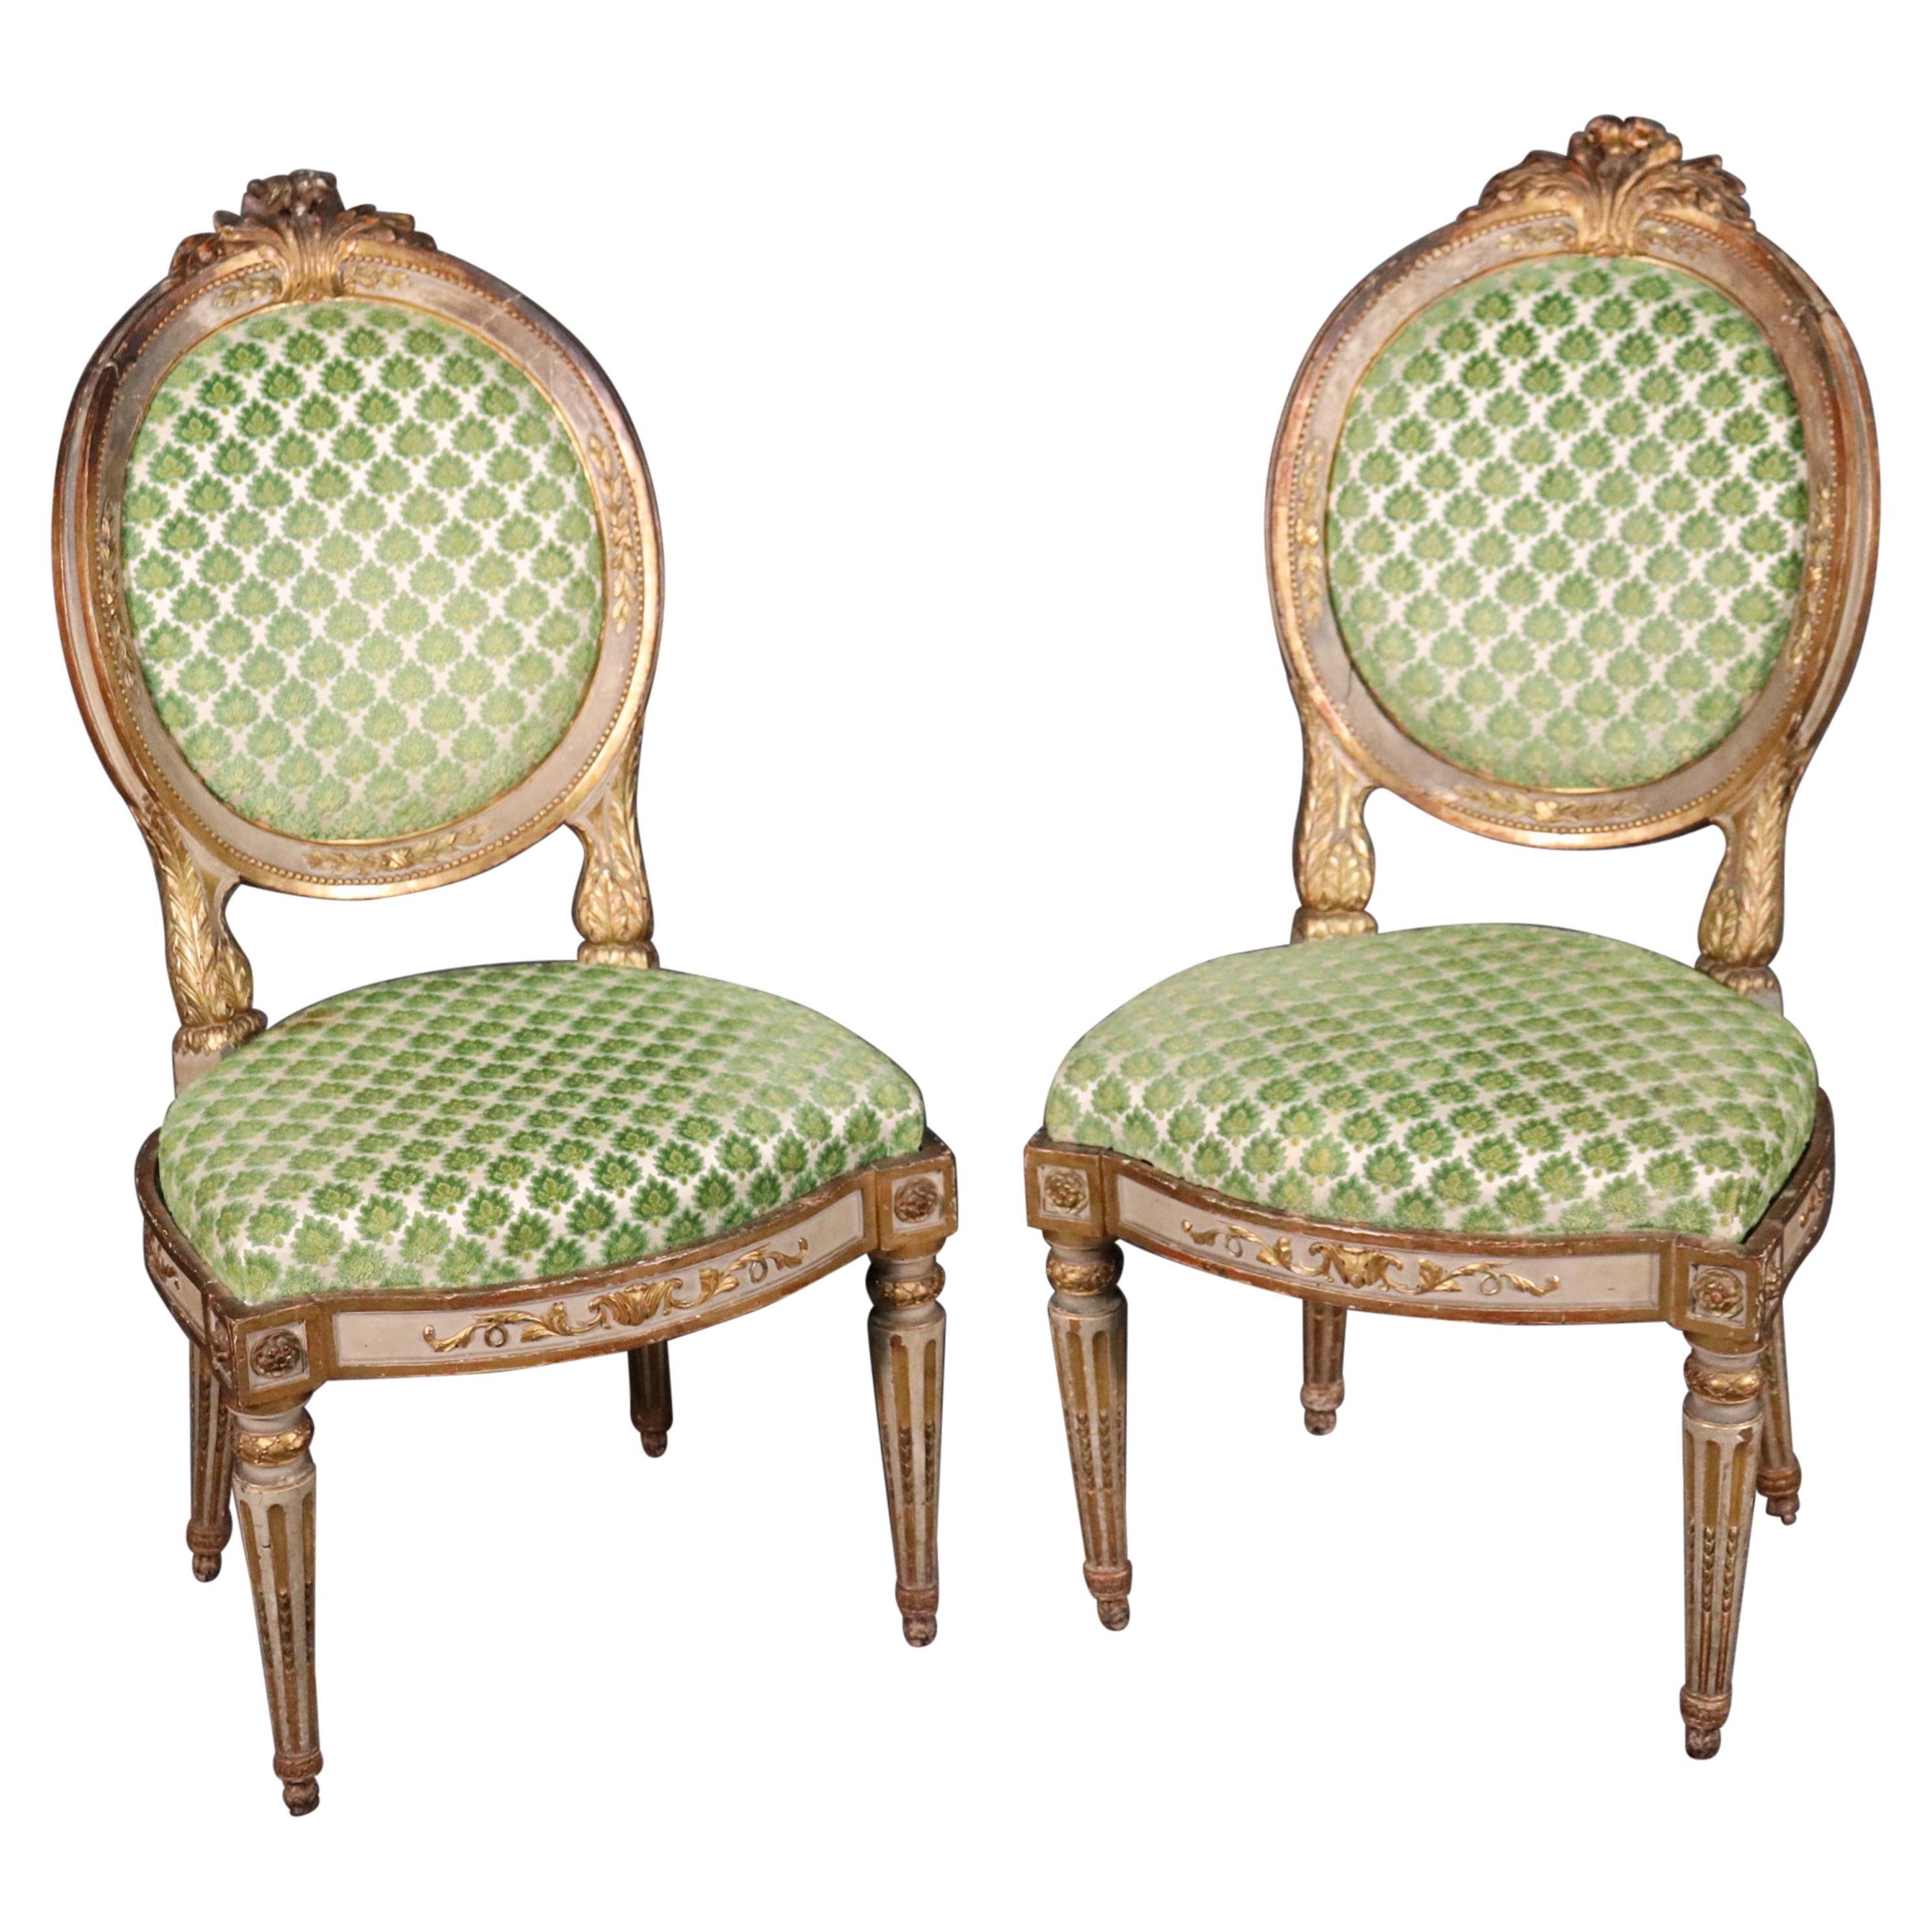 Pair of Period French 1780s Era Louis XVI Paint Decorated Gilded Side Chairs